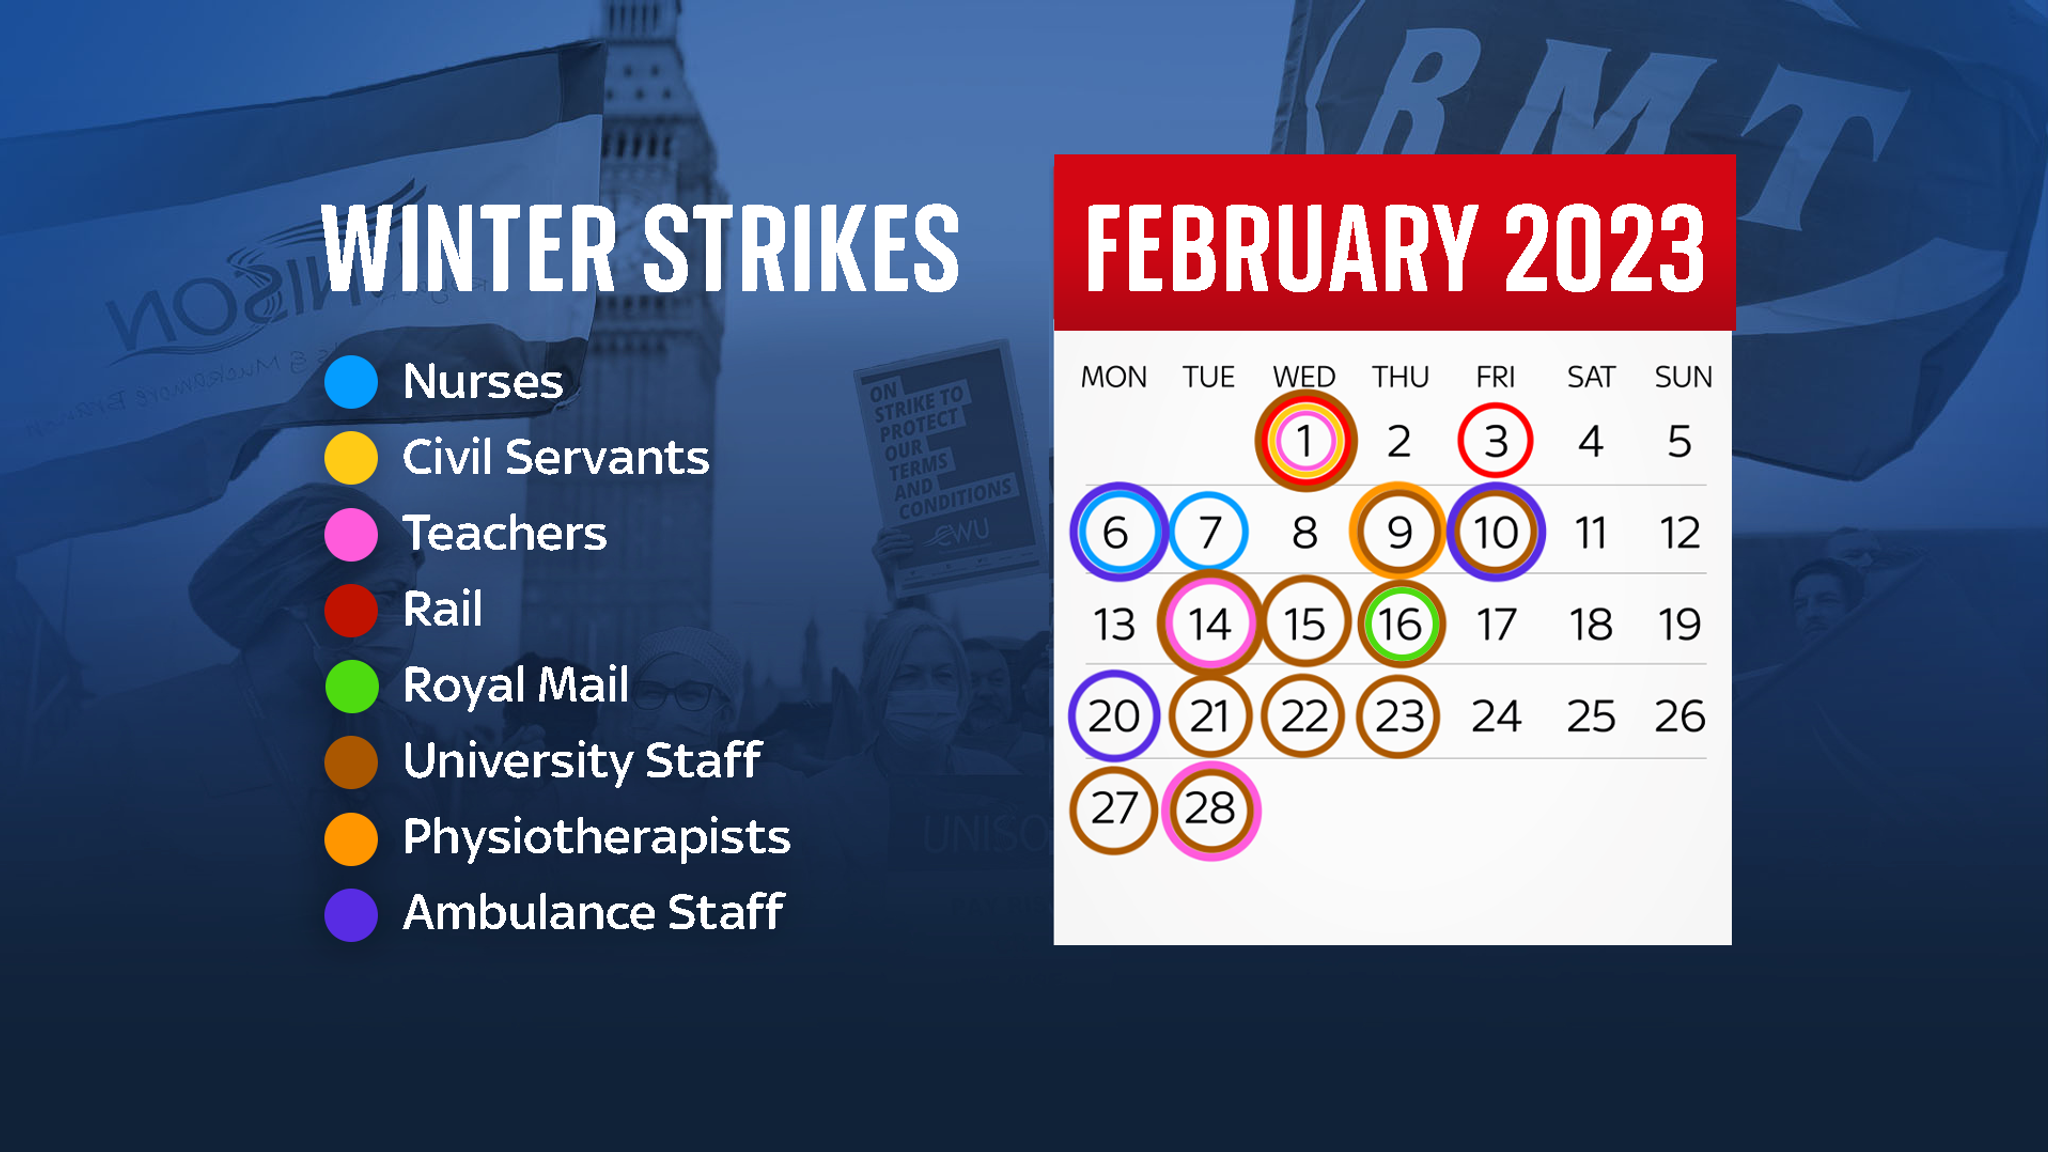 Strikes Who is taking industrial action in 2023 and when?